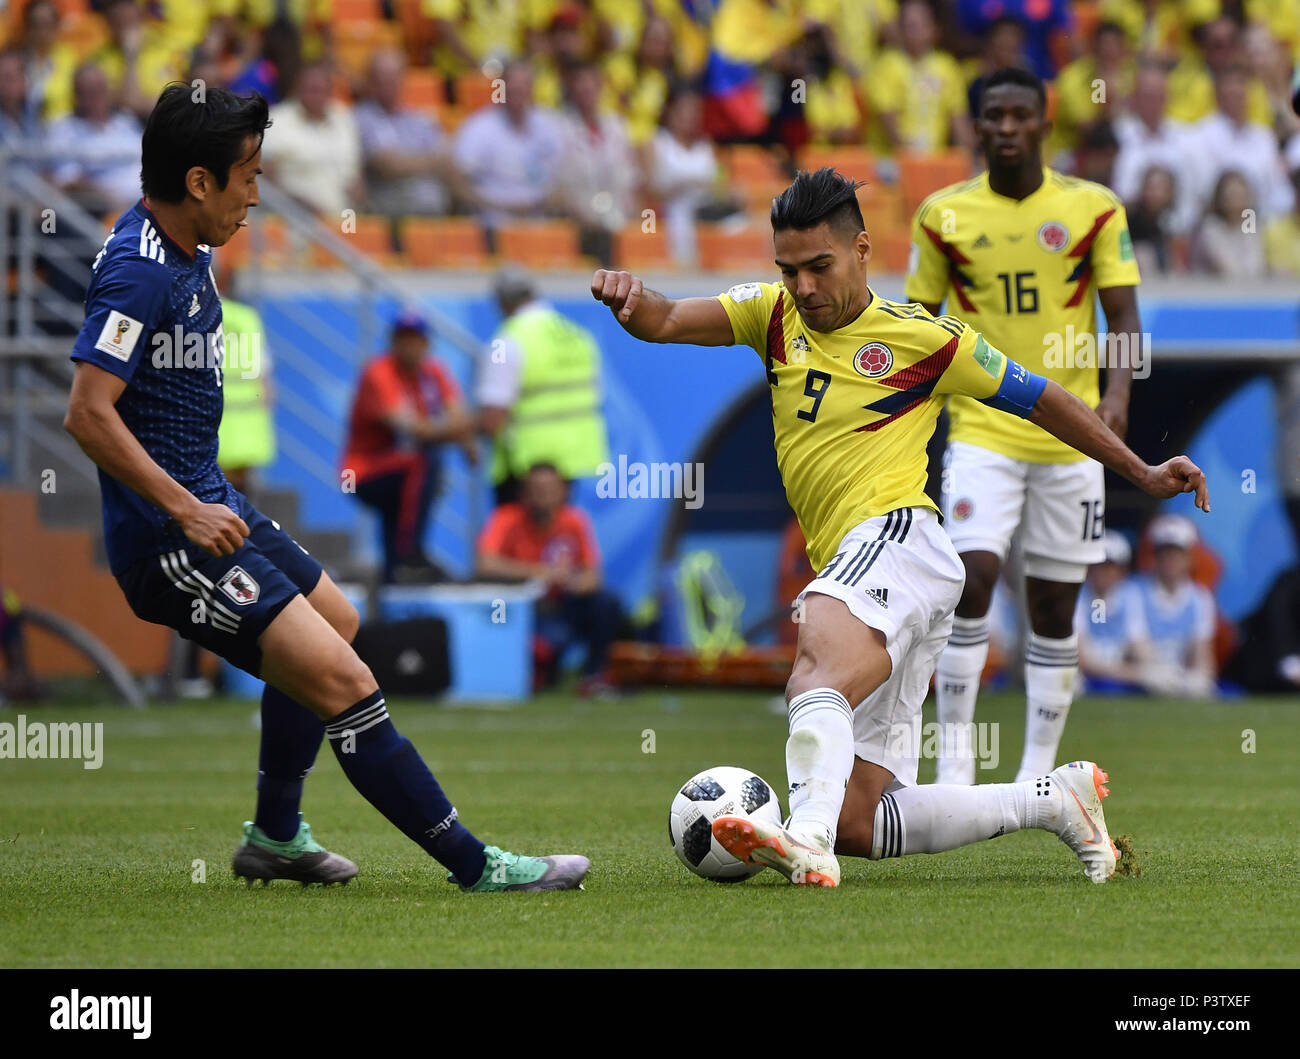 Saransk, Russia. 19th June, 2018. Radamel Falcao (R front) of Colombia competes during a Group H match between Colombia and Japan at the 2018 FIFA World Cup in Saransk, Russia, June 19, 2018. Credit: He Canling/Xinhua/Alamy Live News Stock Photo